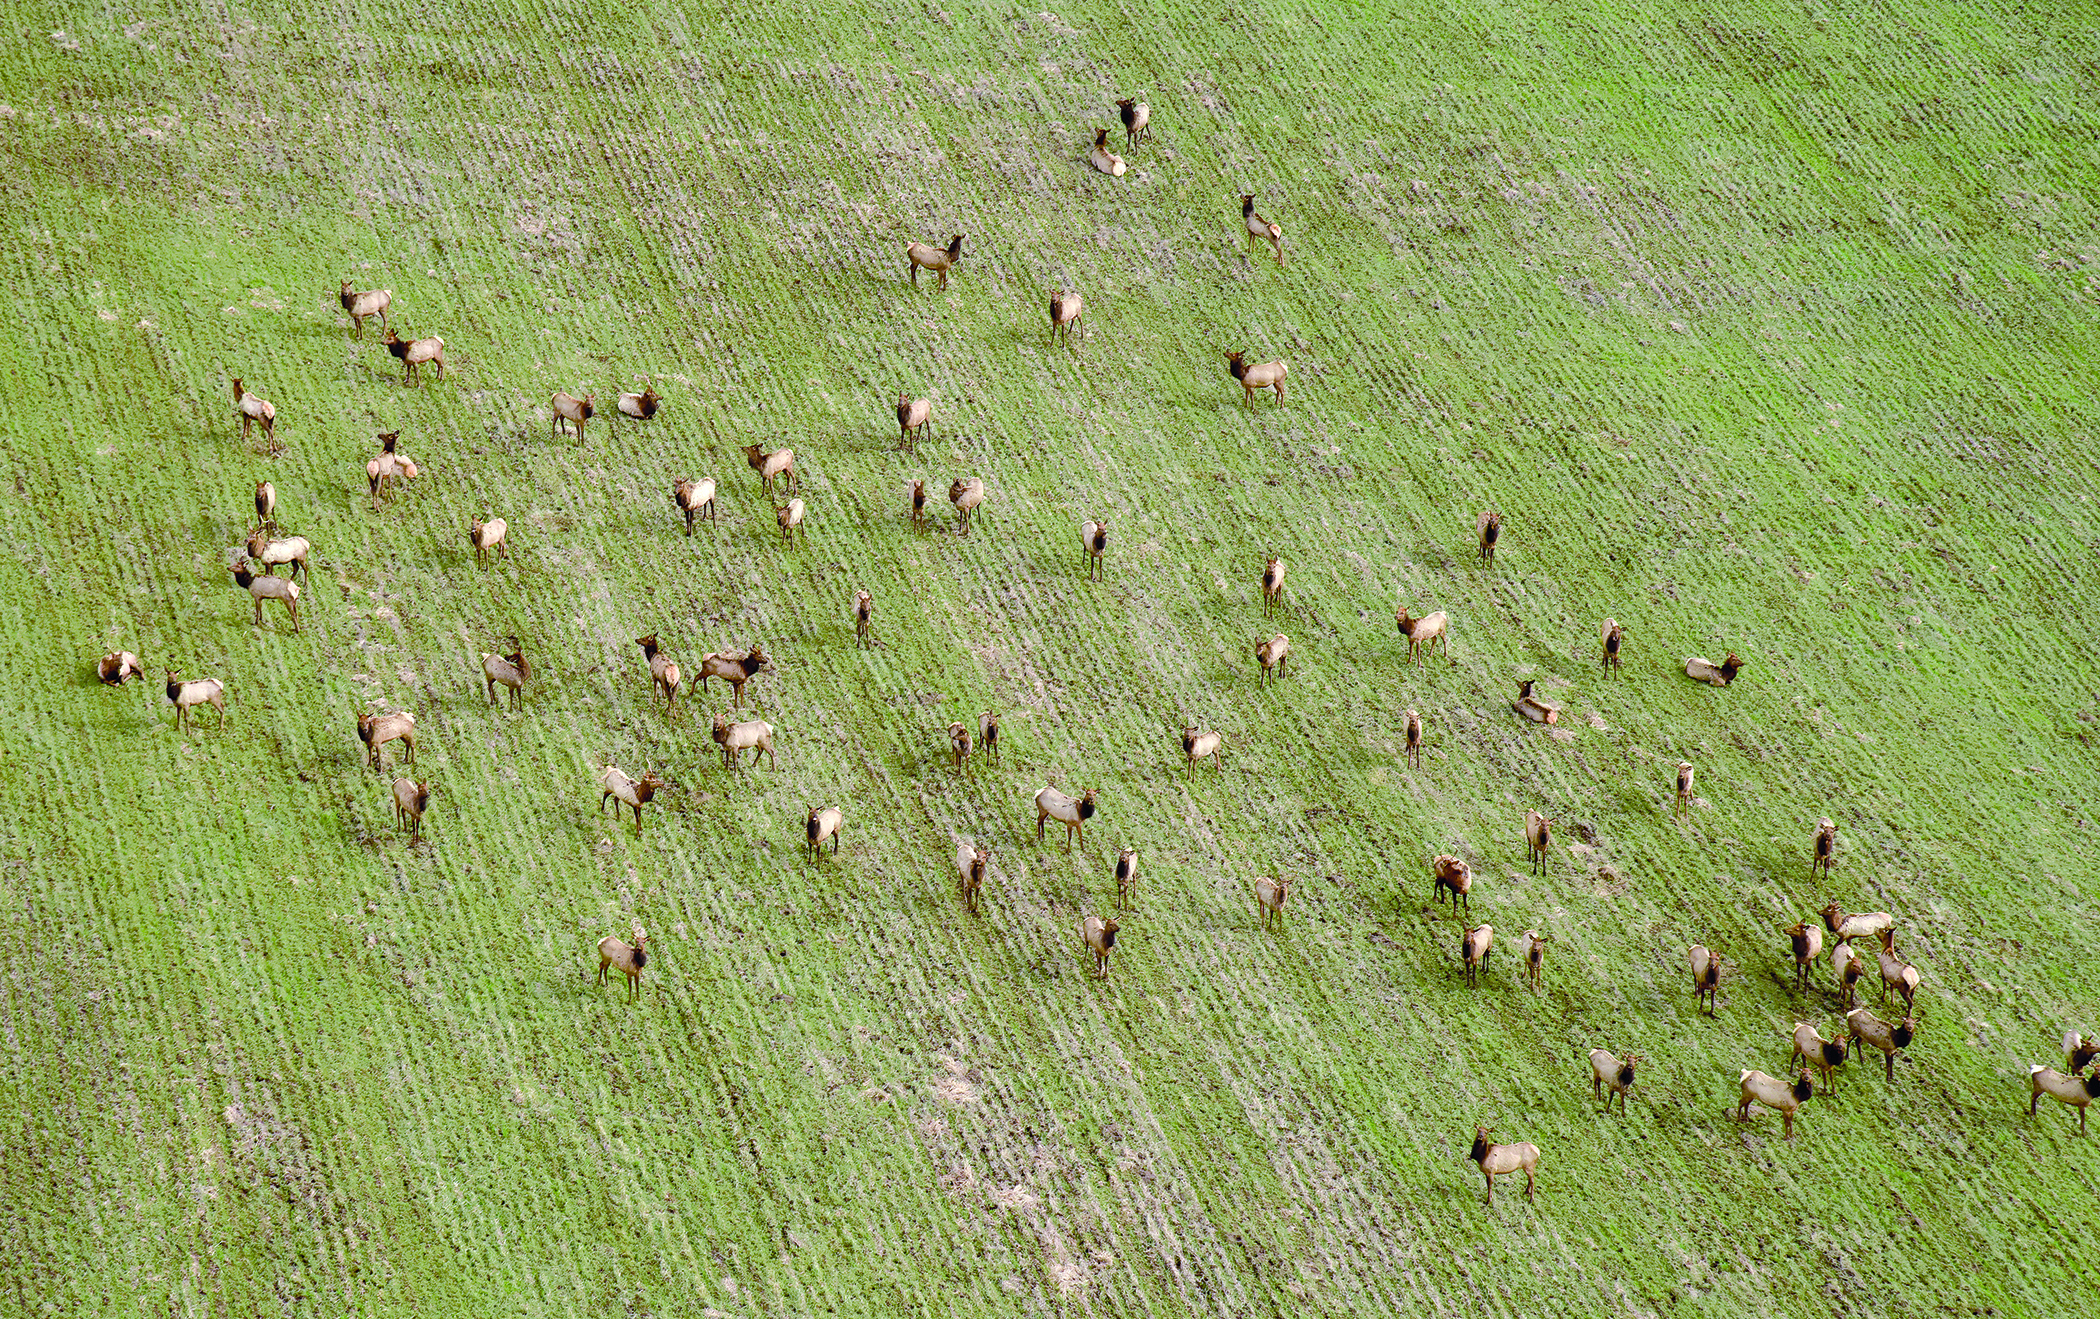 Part of a bigger herd of Rocky Mountain elk graze on upcoming wheat in a field south of the Umatilla River in February. Winter hasn’t been too tough on big game this year and with March already here the outlook for more cold gets less and less.